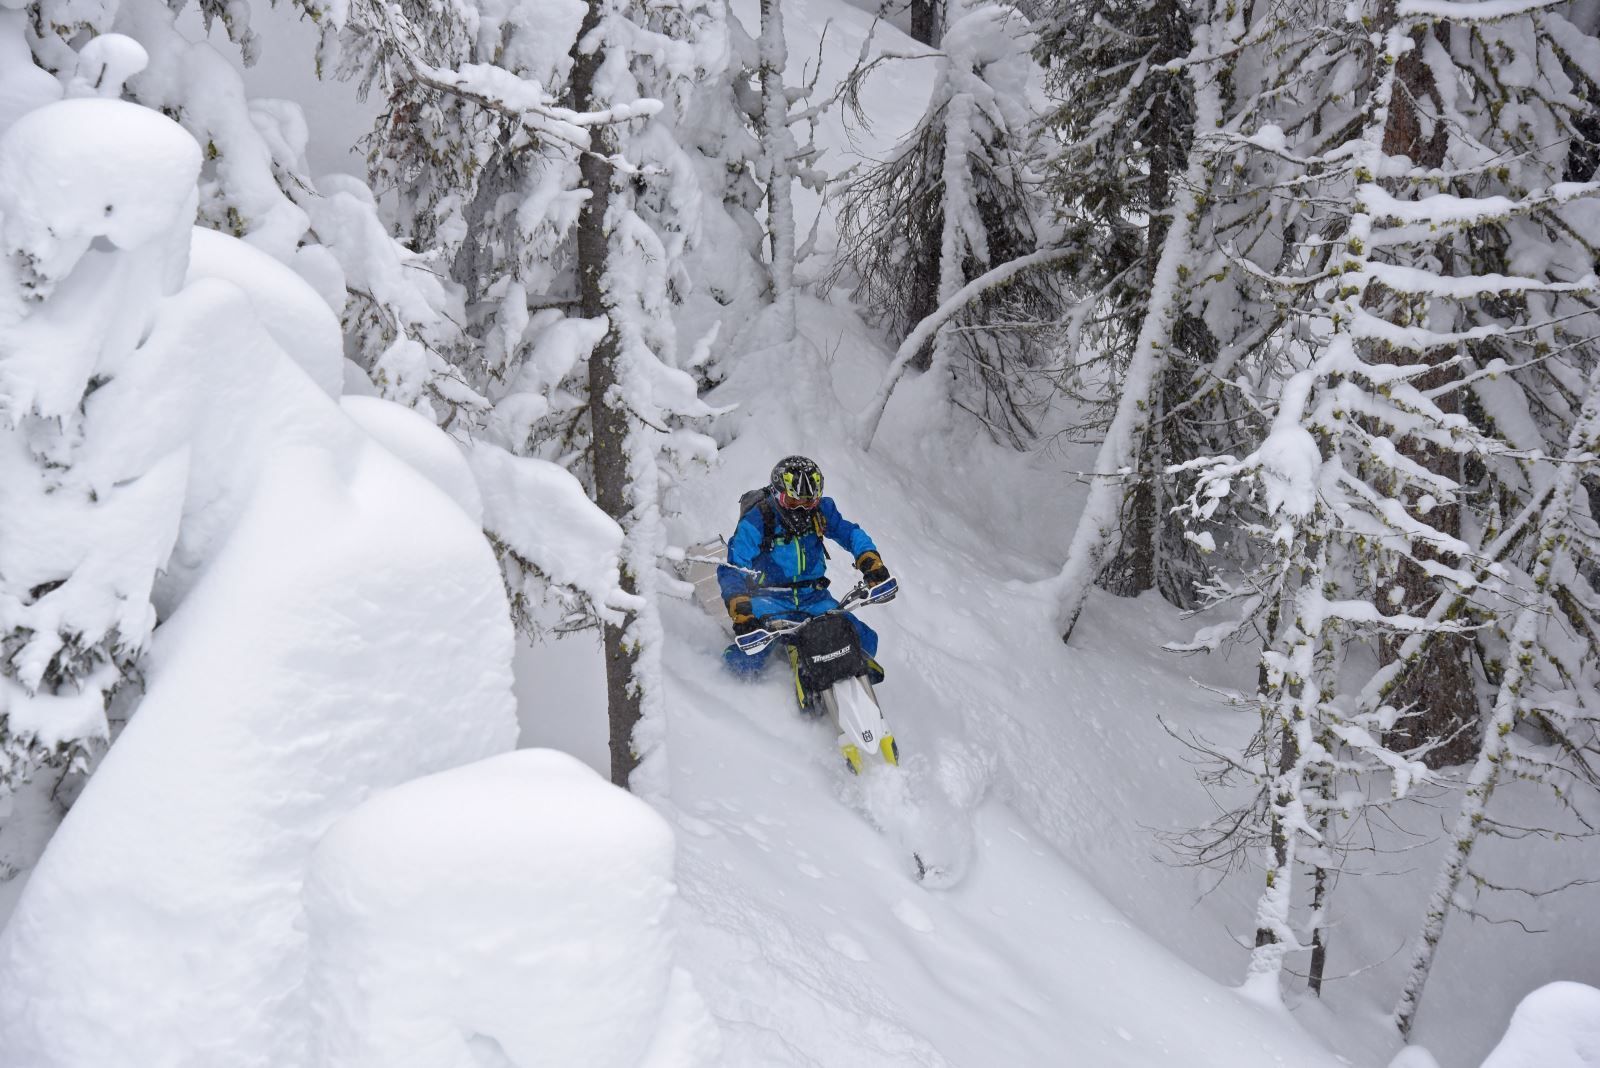 Riding the deep powder in the trees on a snowbike